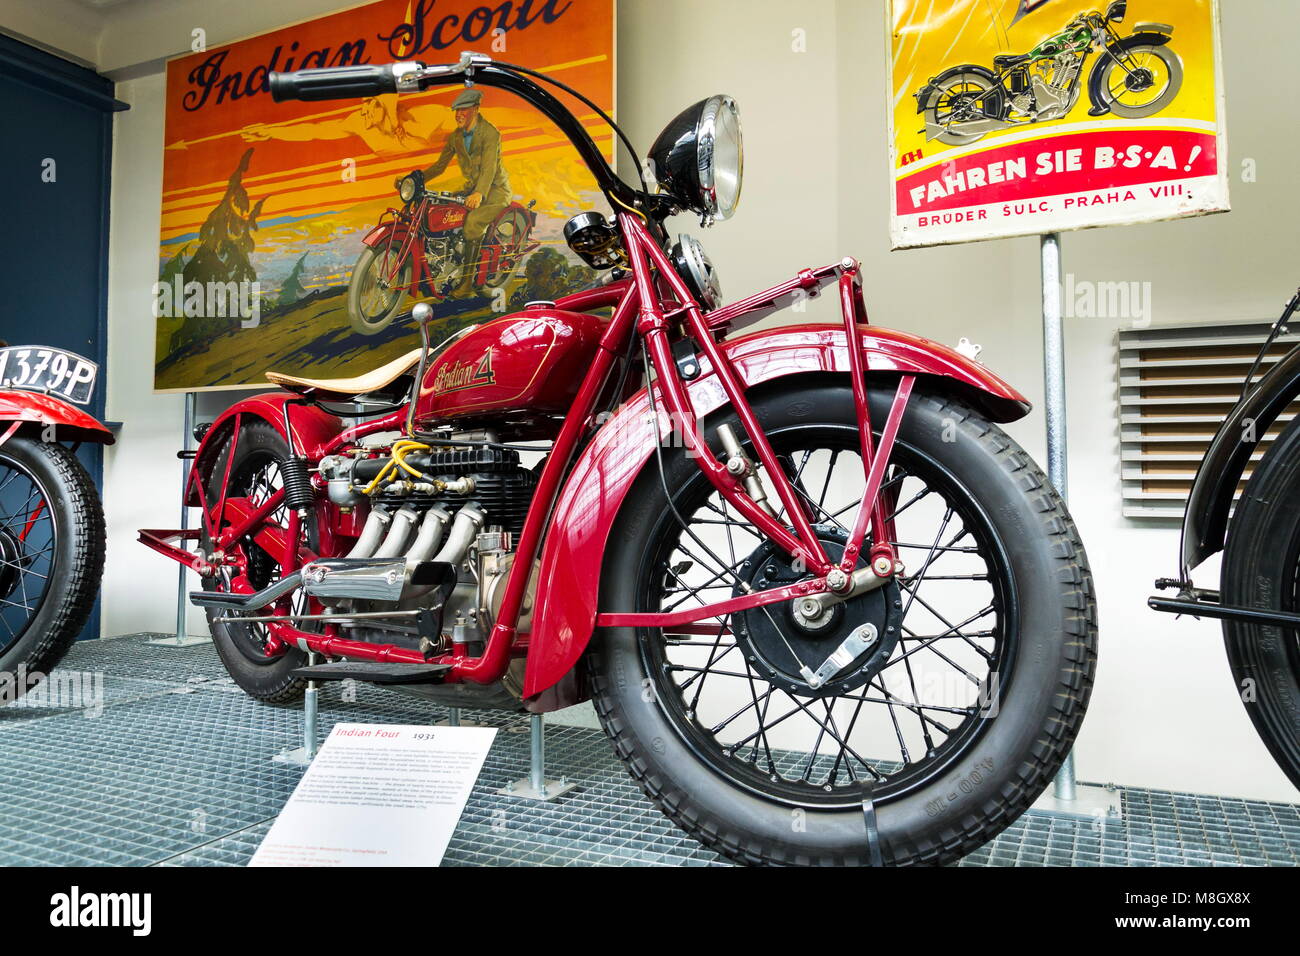 PRAGUE, CZECH REPUBLIC - MARCH 8 2018: American motorcycle Indian Four from year 1931 stands on March 8, 2018 in Prague, Czech Republic. Stock Photo